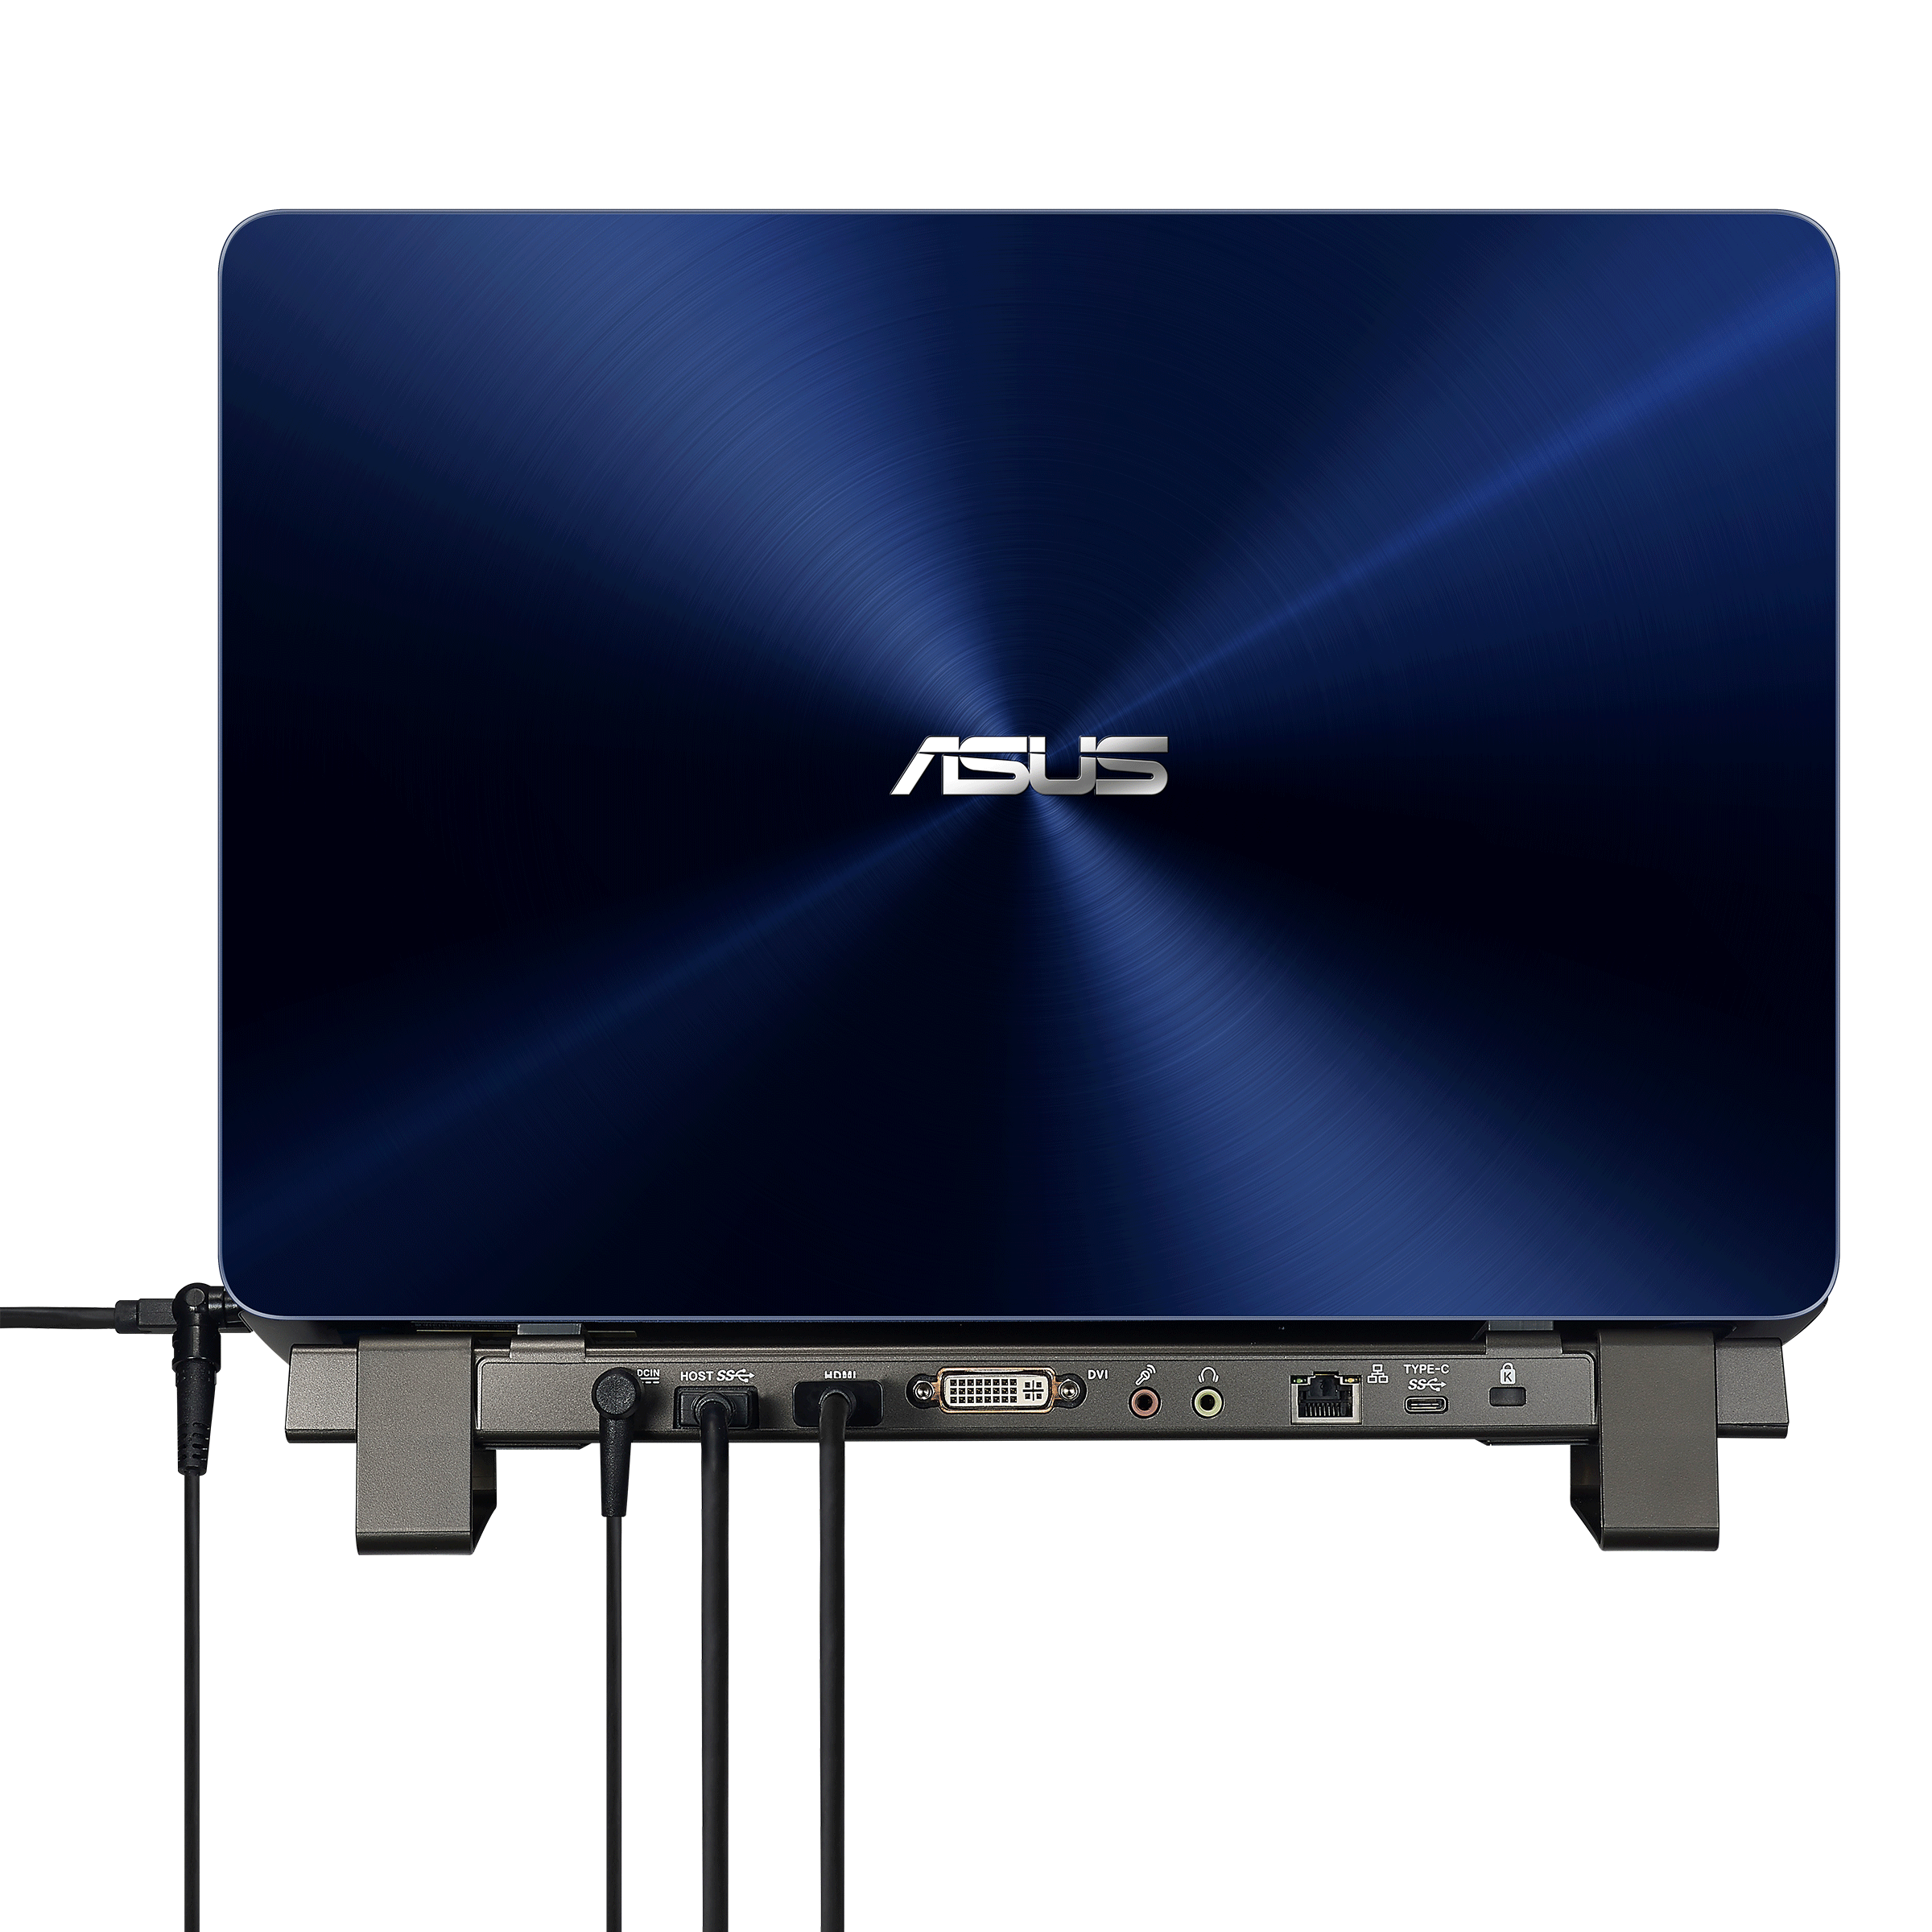 ASUS USB3.0 HZ-3B Docking Dongles and Cable｜ASUS Global